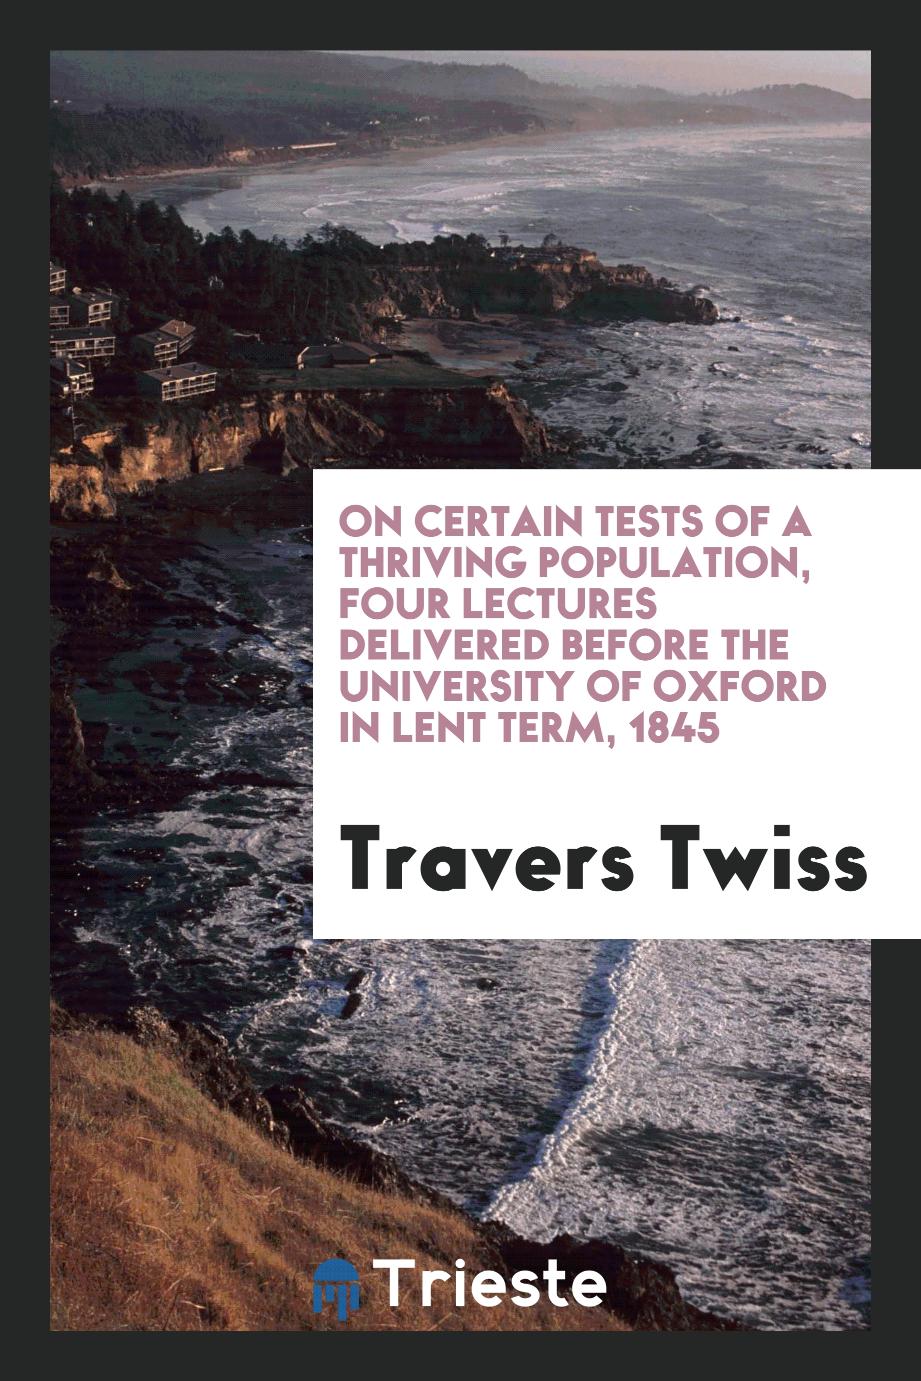 On Certain Tests of a Thriving Population, Four Lectures Delivered before the University of Oxford in Lent Term, 1845